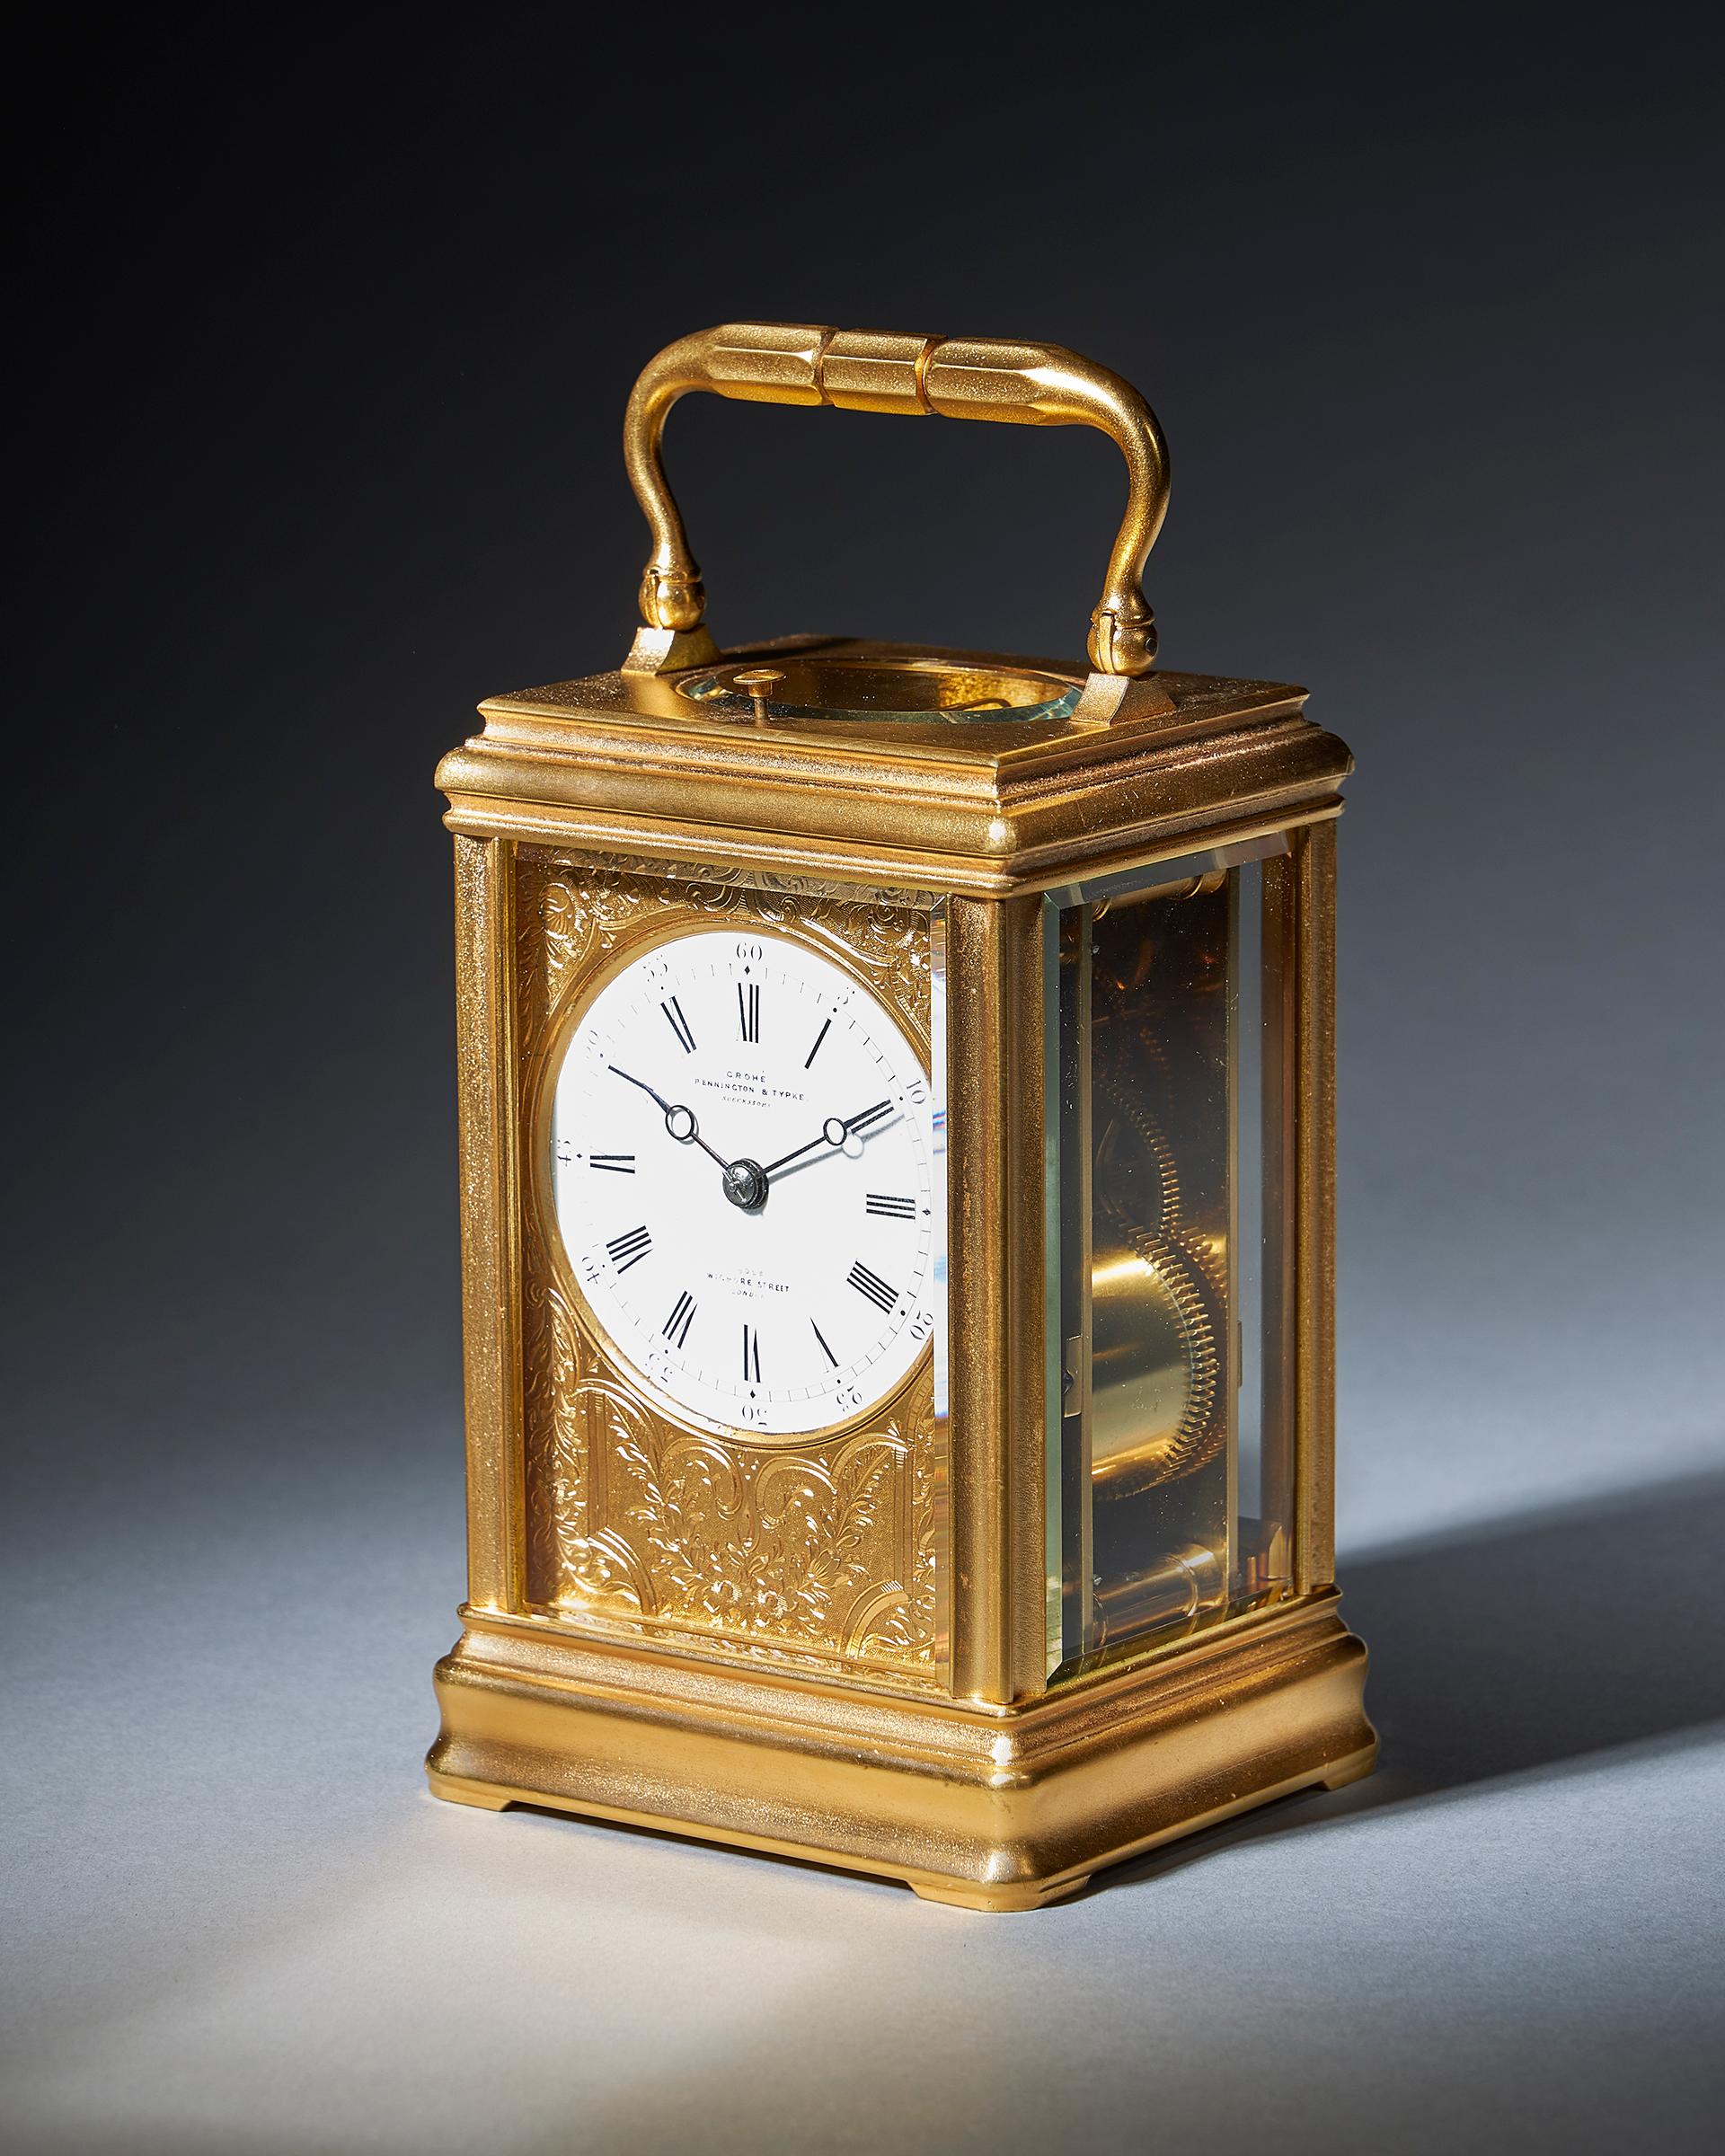 A superb repeating carriage clock with a gilt-brass gorge case by the famous maker Drocourt, circa 1870.

A lovely eight-day striking and repeating carriage clock signed and numbered by the retailer on the enamel dial, GROHÉ PENNINGTON & TYPKE